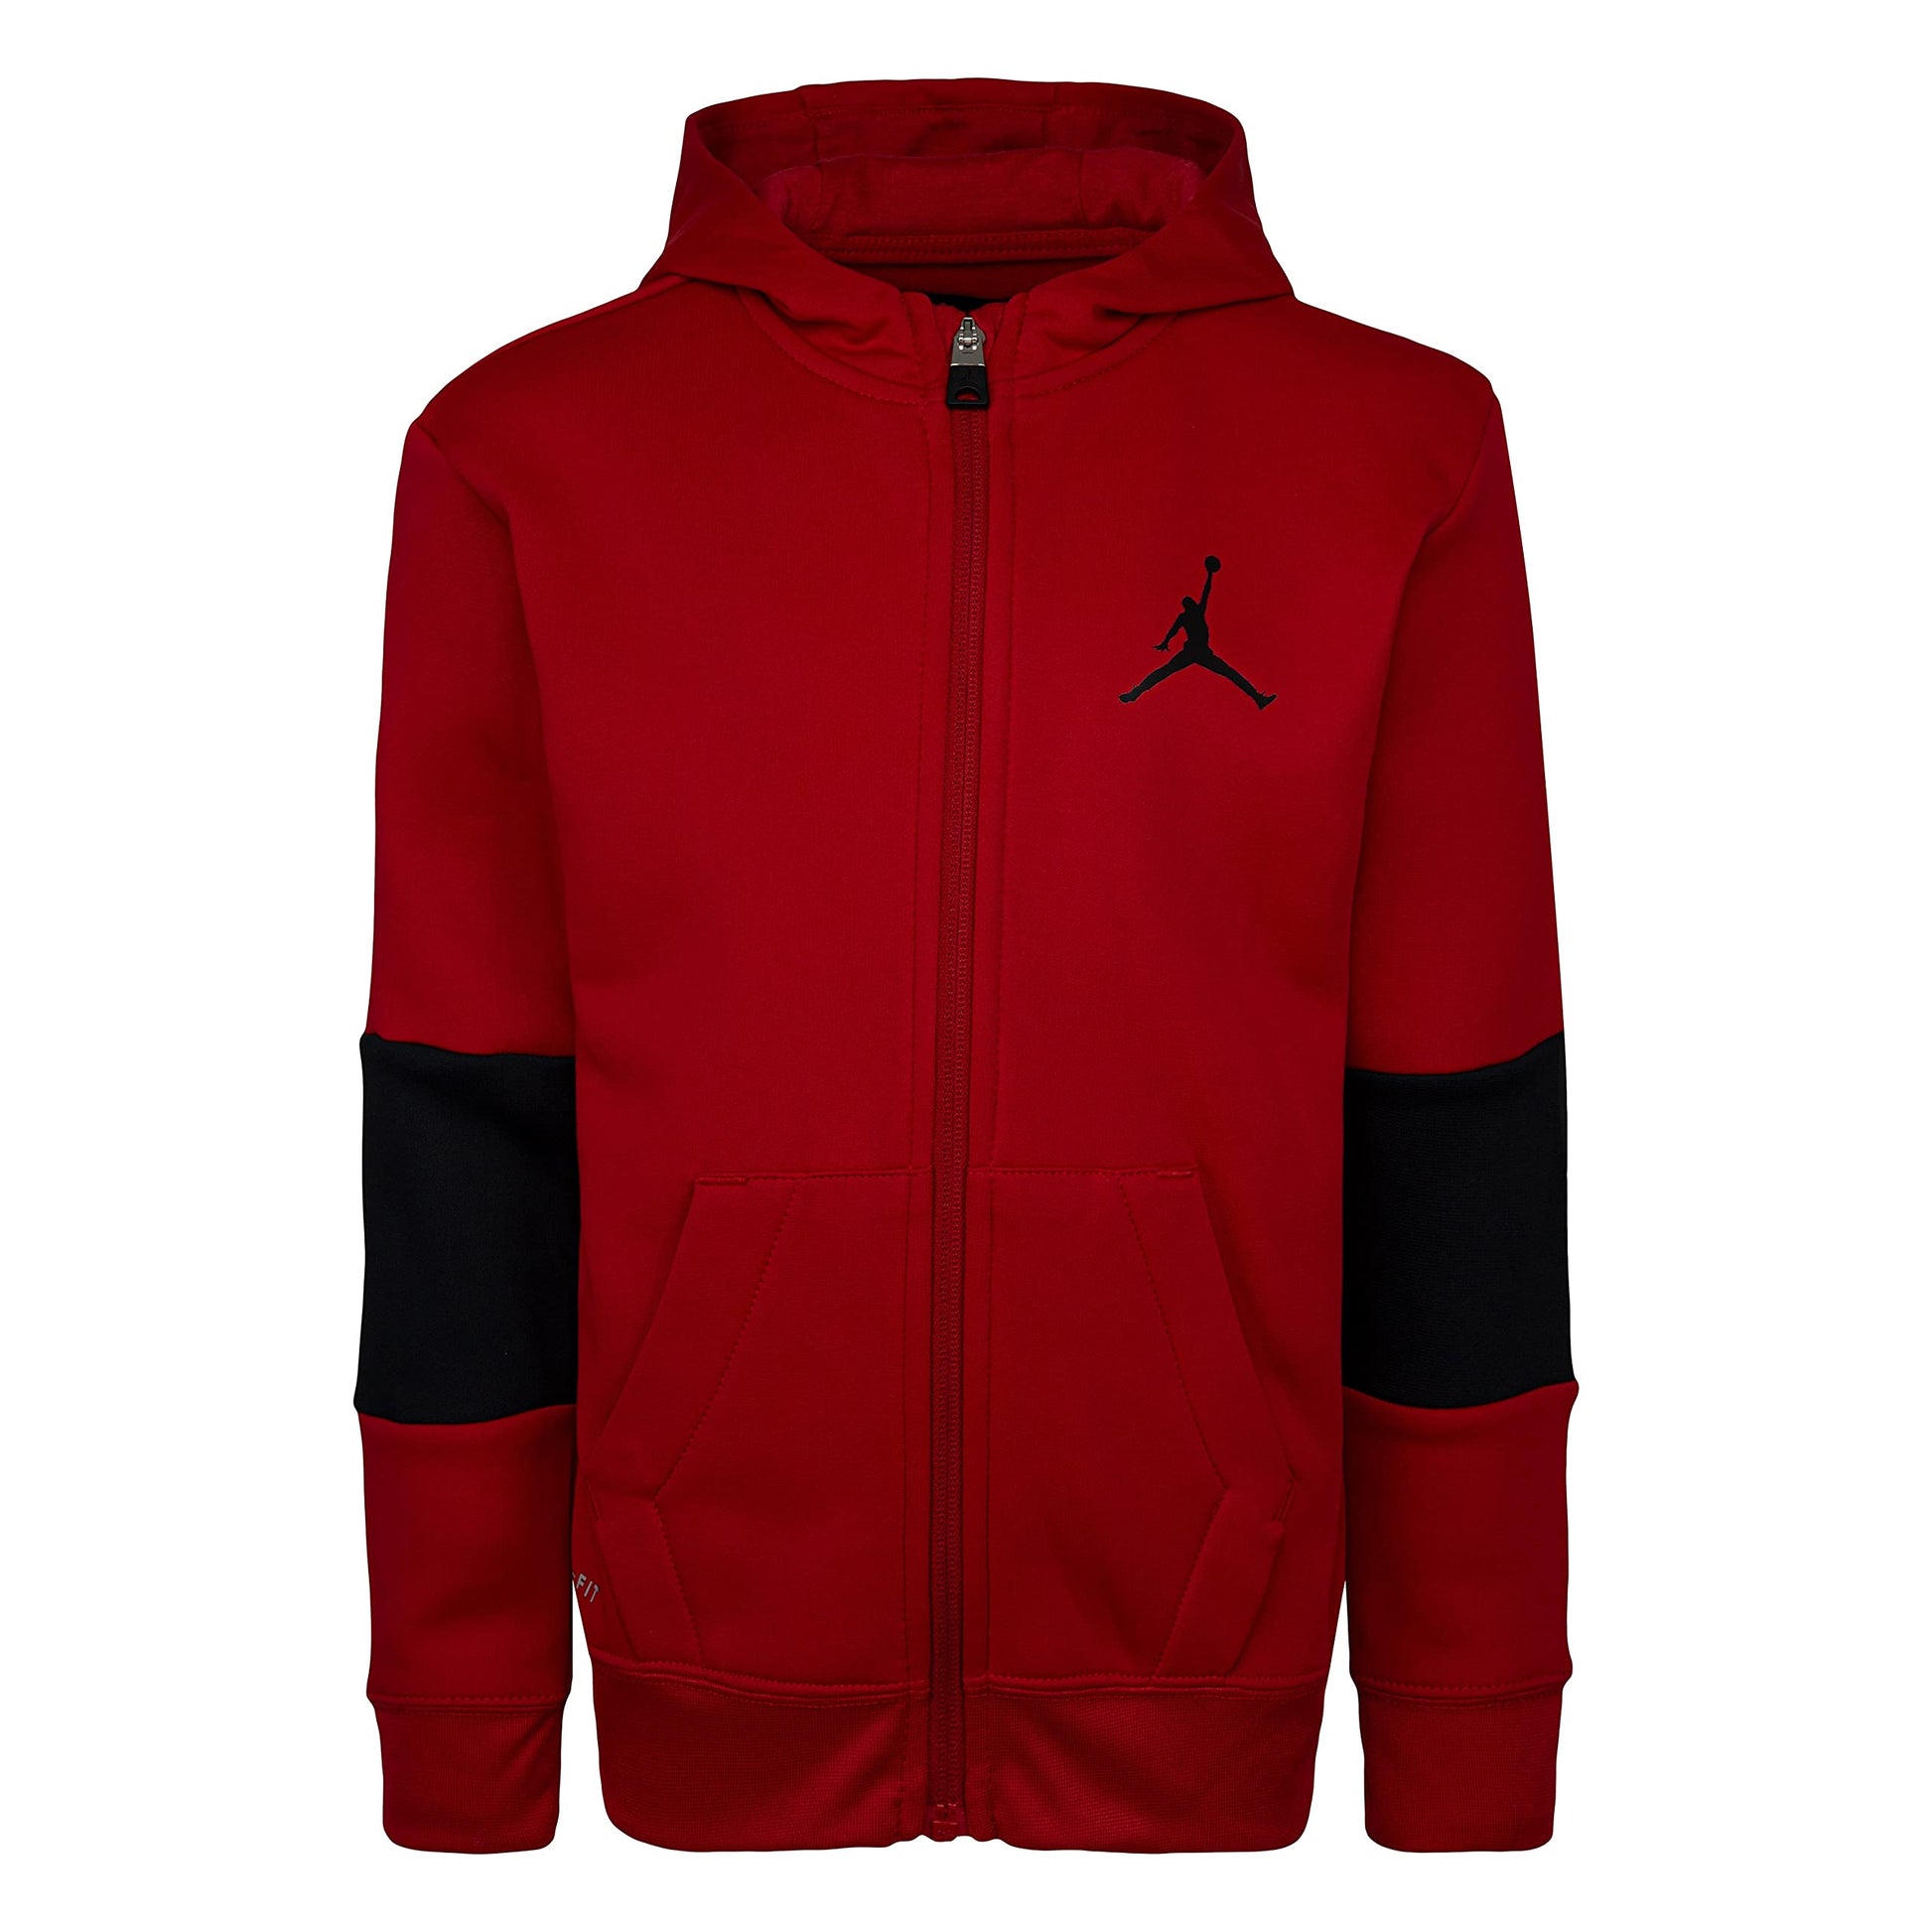 Image 1 of Core Performance Therma Full Zip (Little Kids)